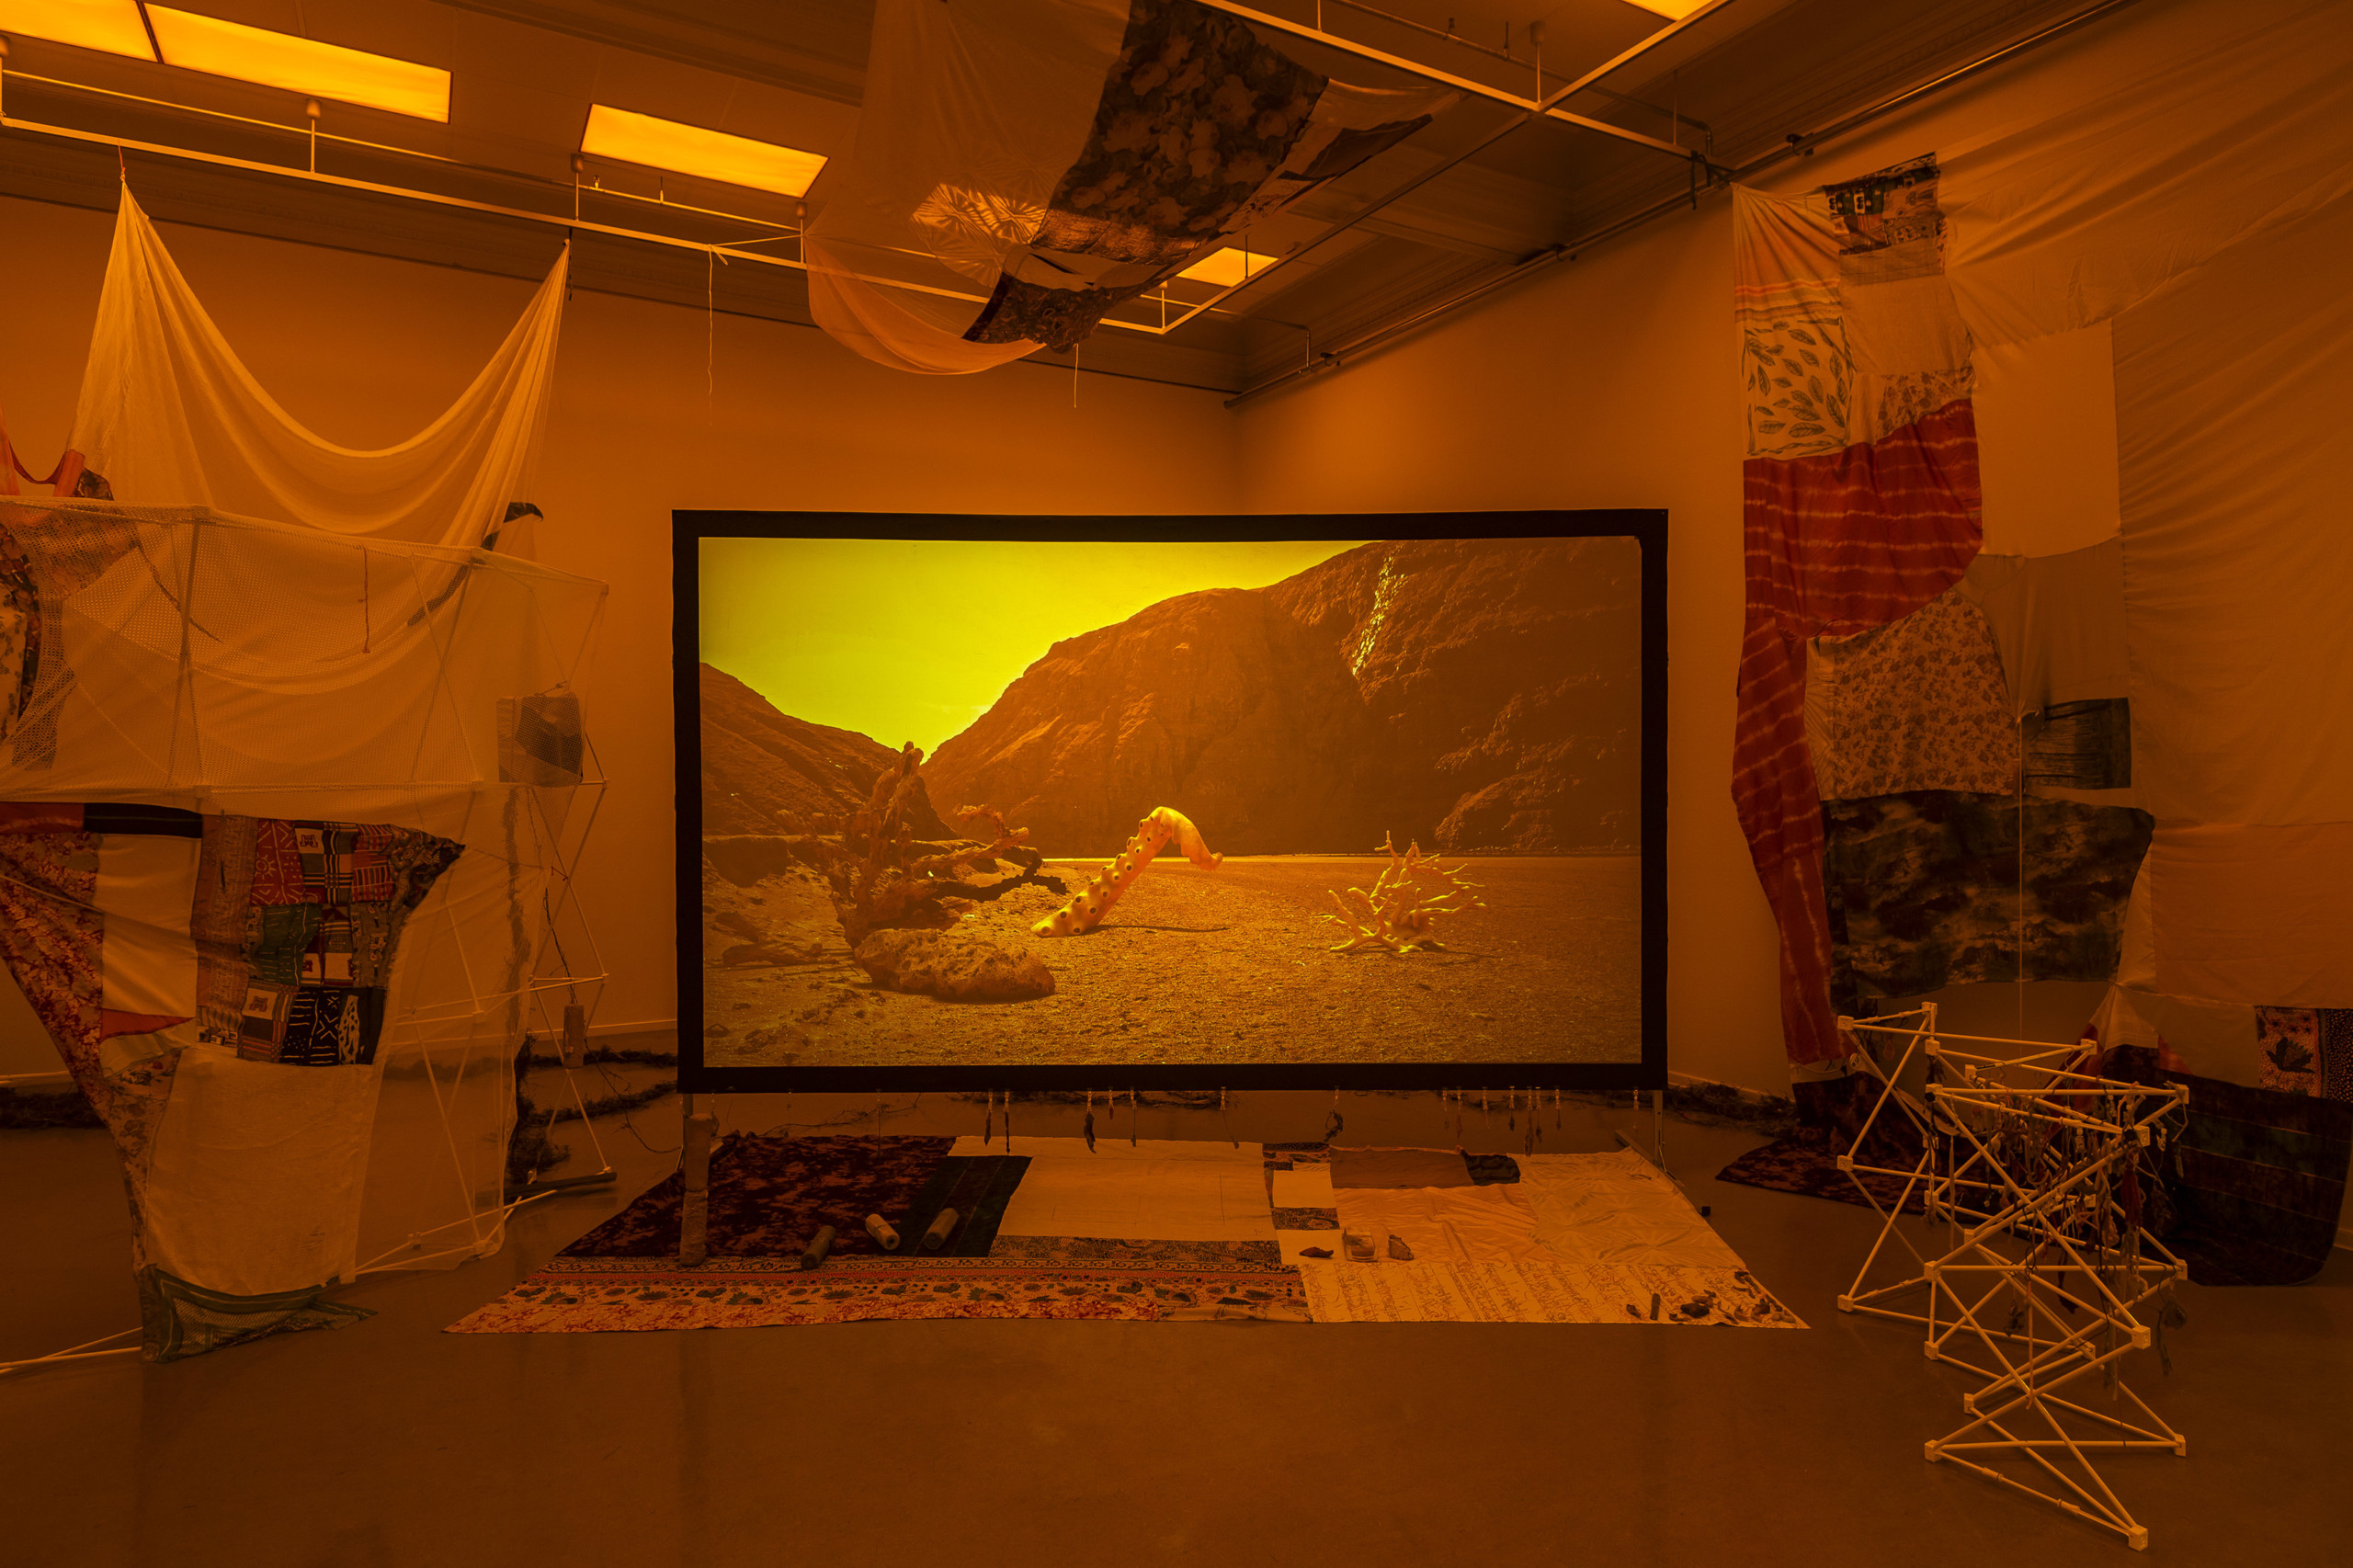 Image of an installation with a video screen in the middle and fabrics hung up on the walls. The video still shows a view of a desert with sea corals on the front.